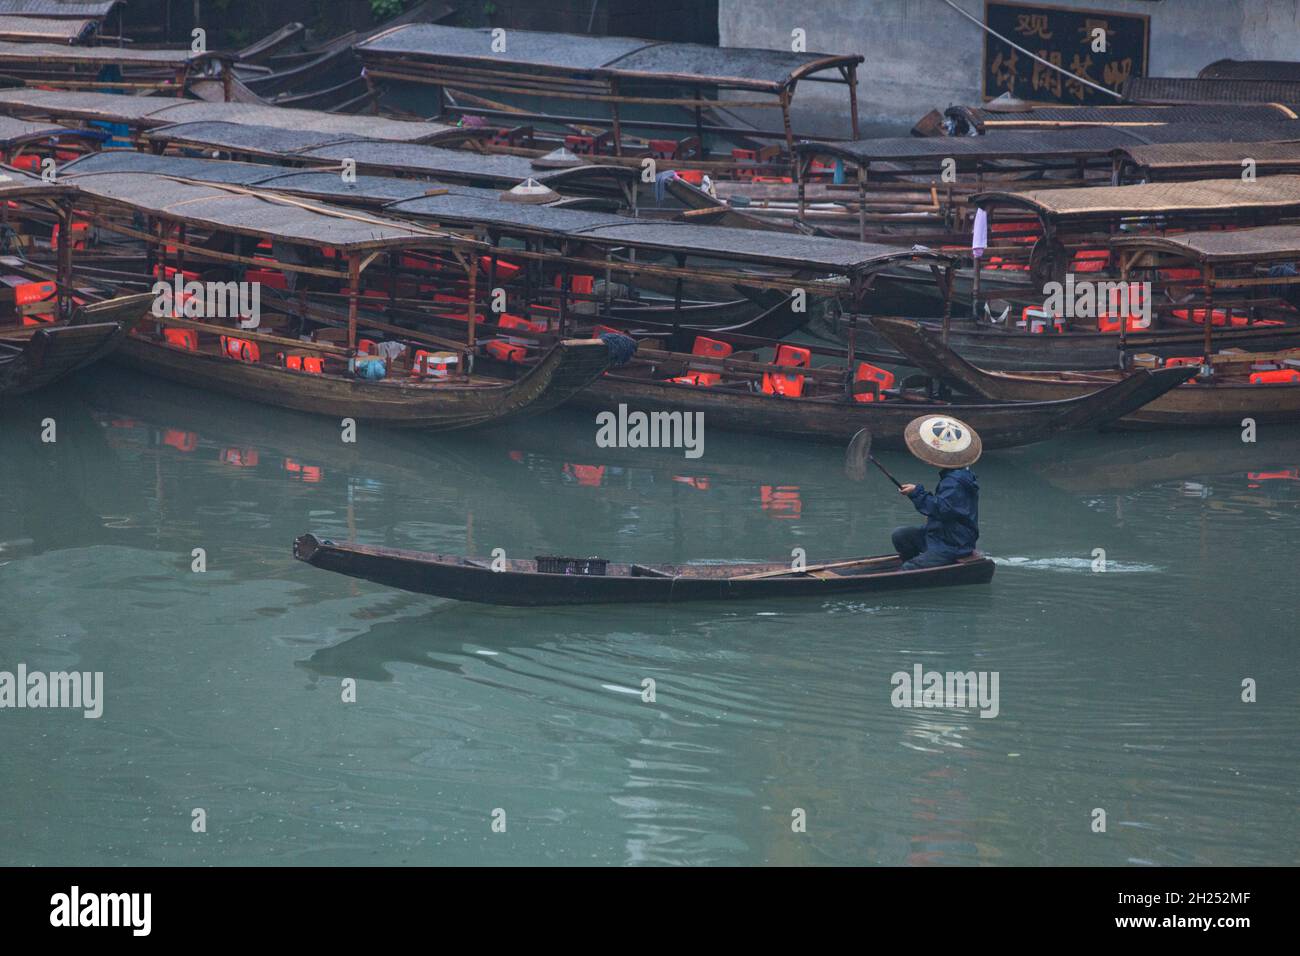 A man in a traditional conical hat paddles a sampan on the Tuojiang River in Fenghuang, China. Stock Photo